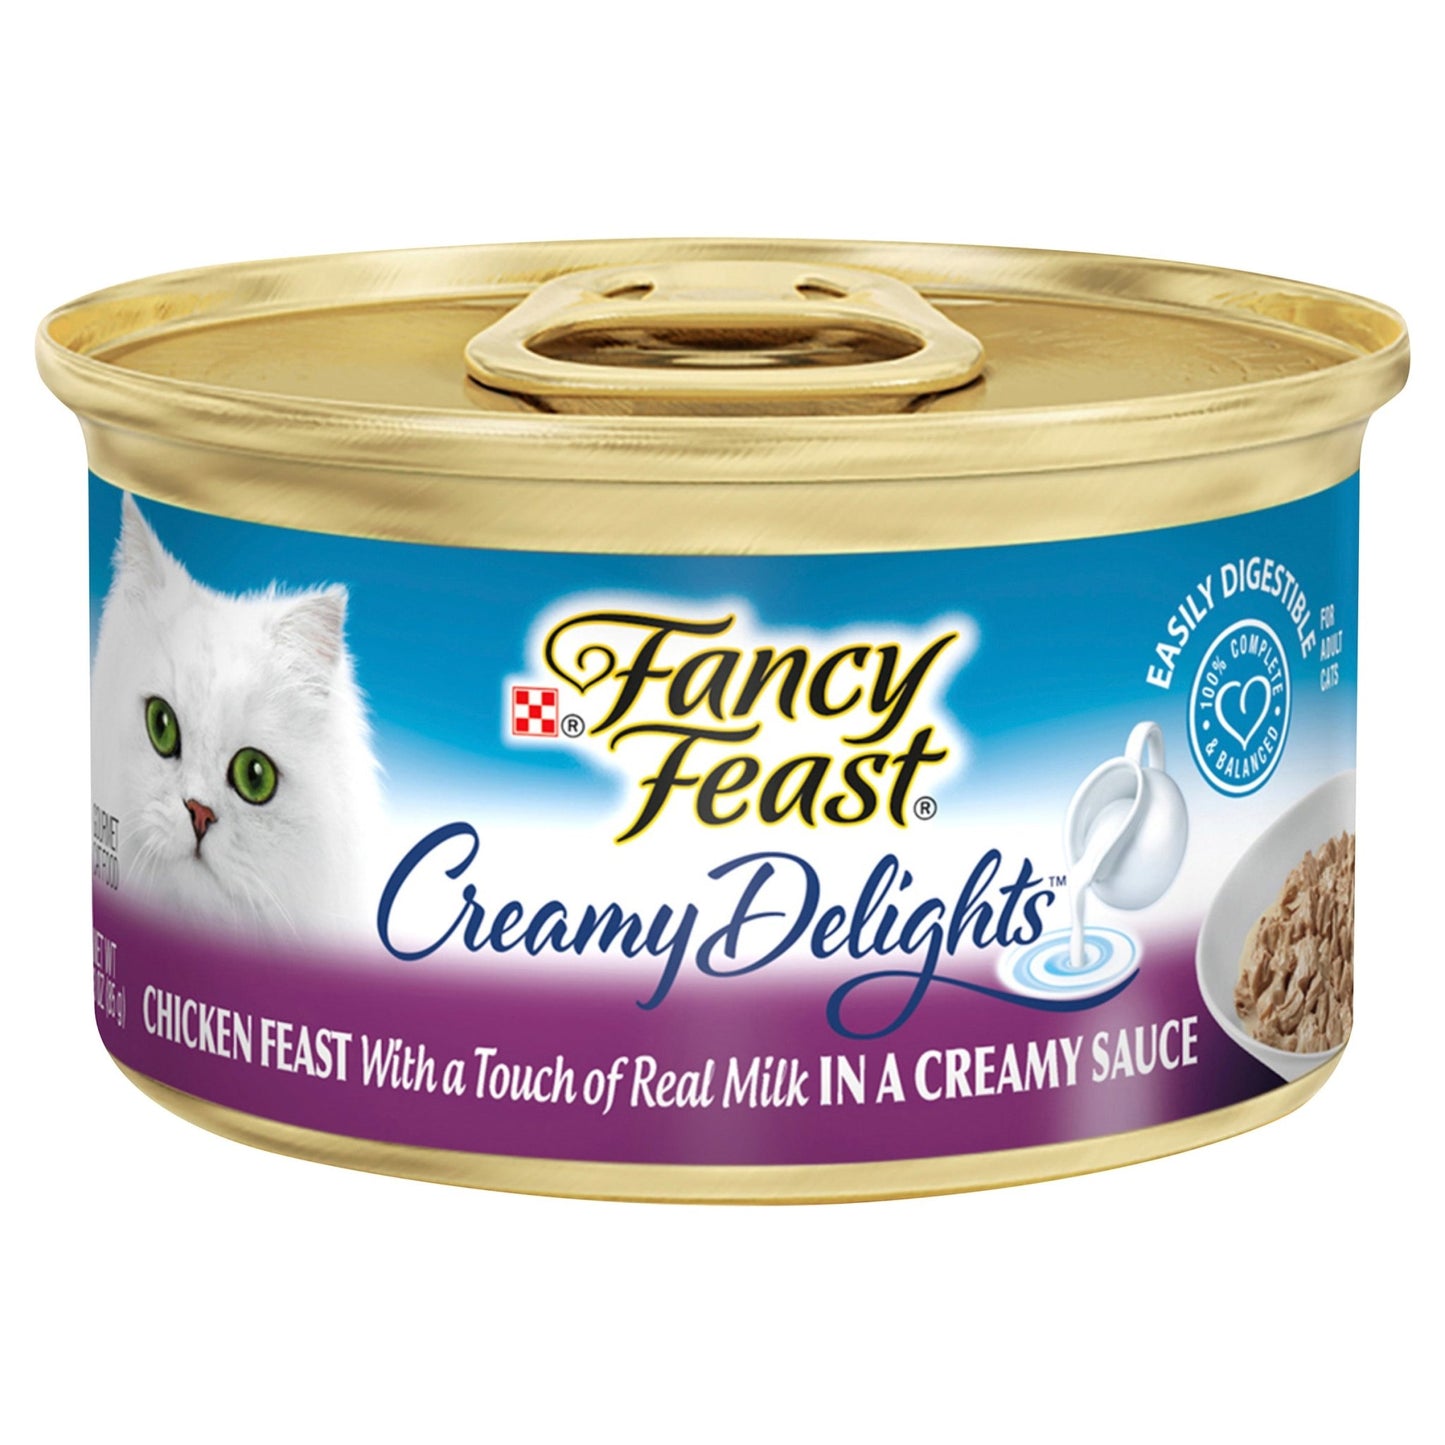 Fancy Feast Creamy Delights Grilled Chicken 85g - Woonona Petfood & Produce